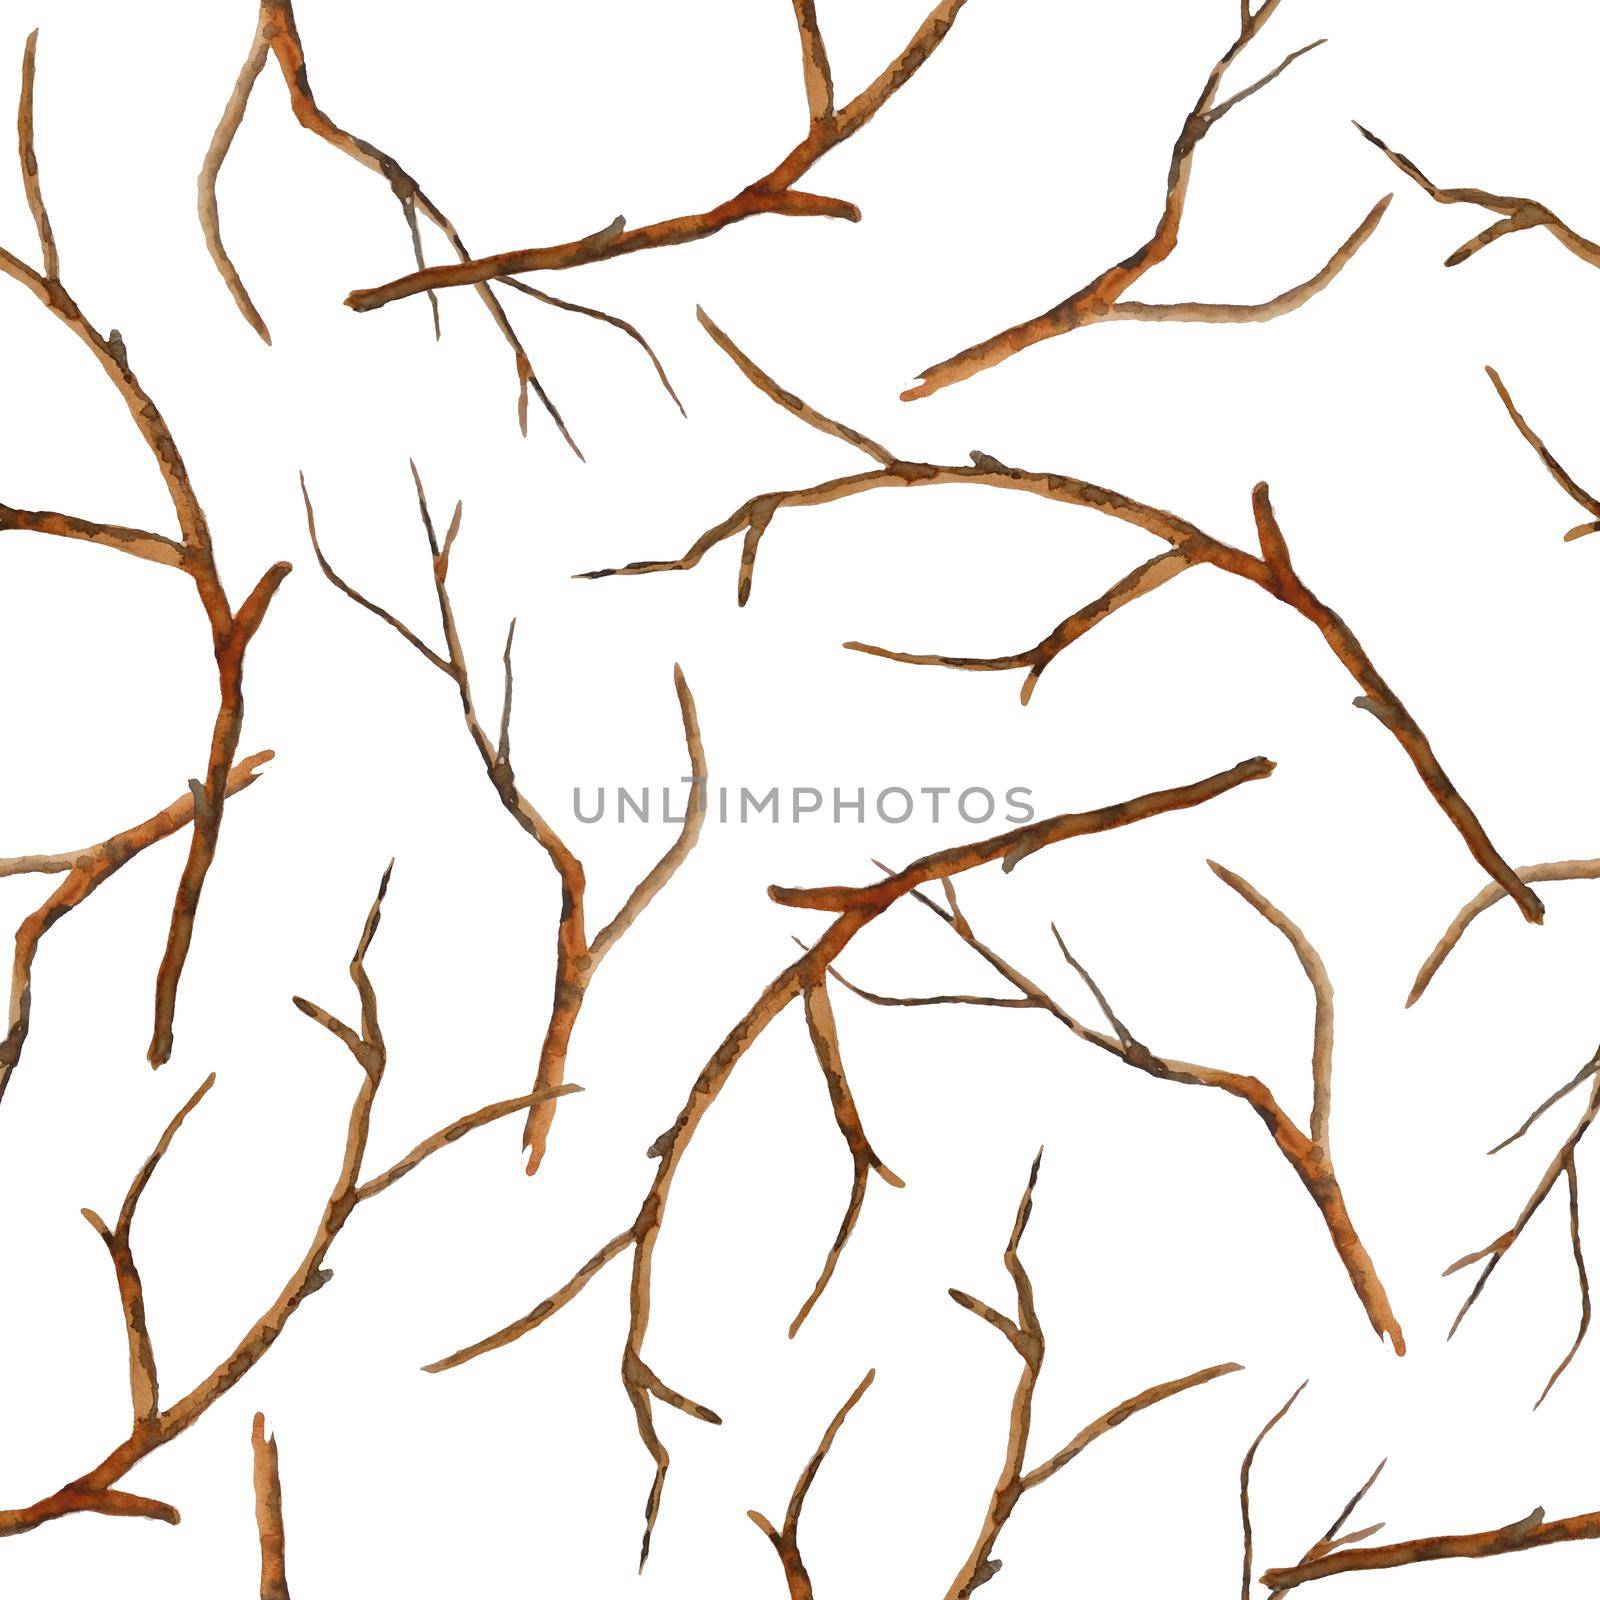 Watercolor hand drawn seamless pattern with brown branches twigs without leaves. Autumn fall winter illustration, wood woodland forest ecology environment design. Outdoor rustic elegant elements